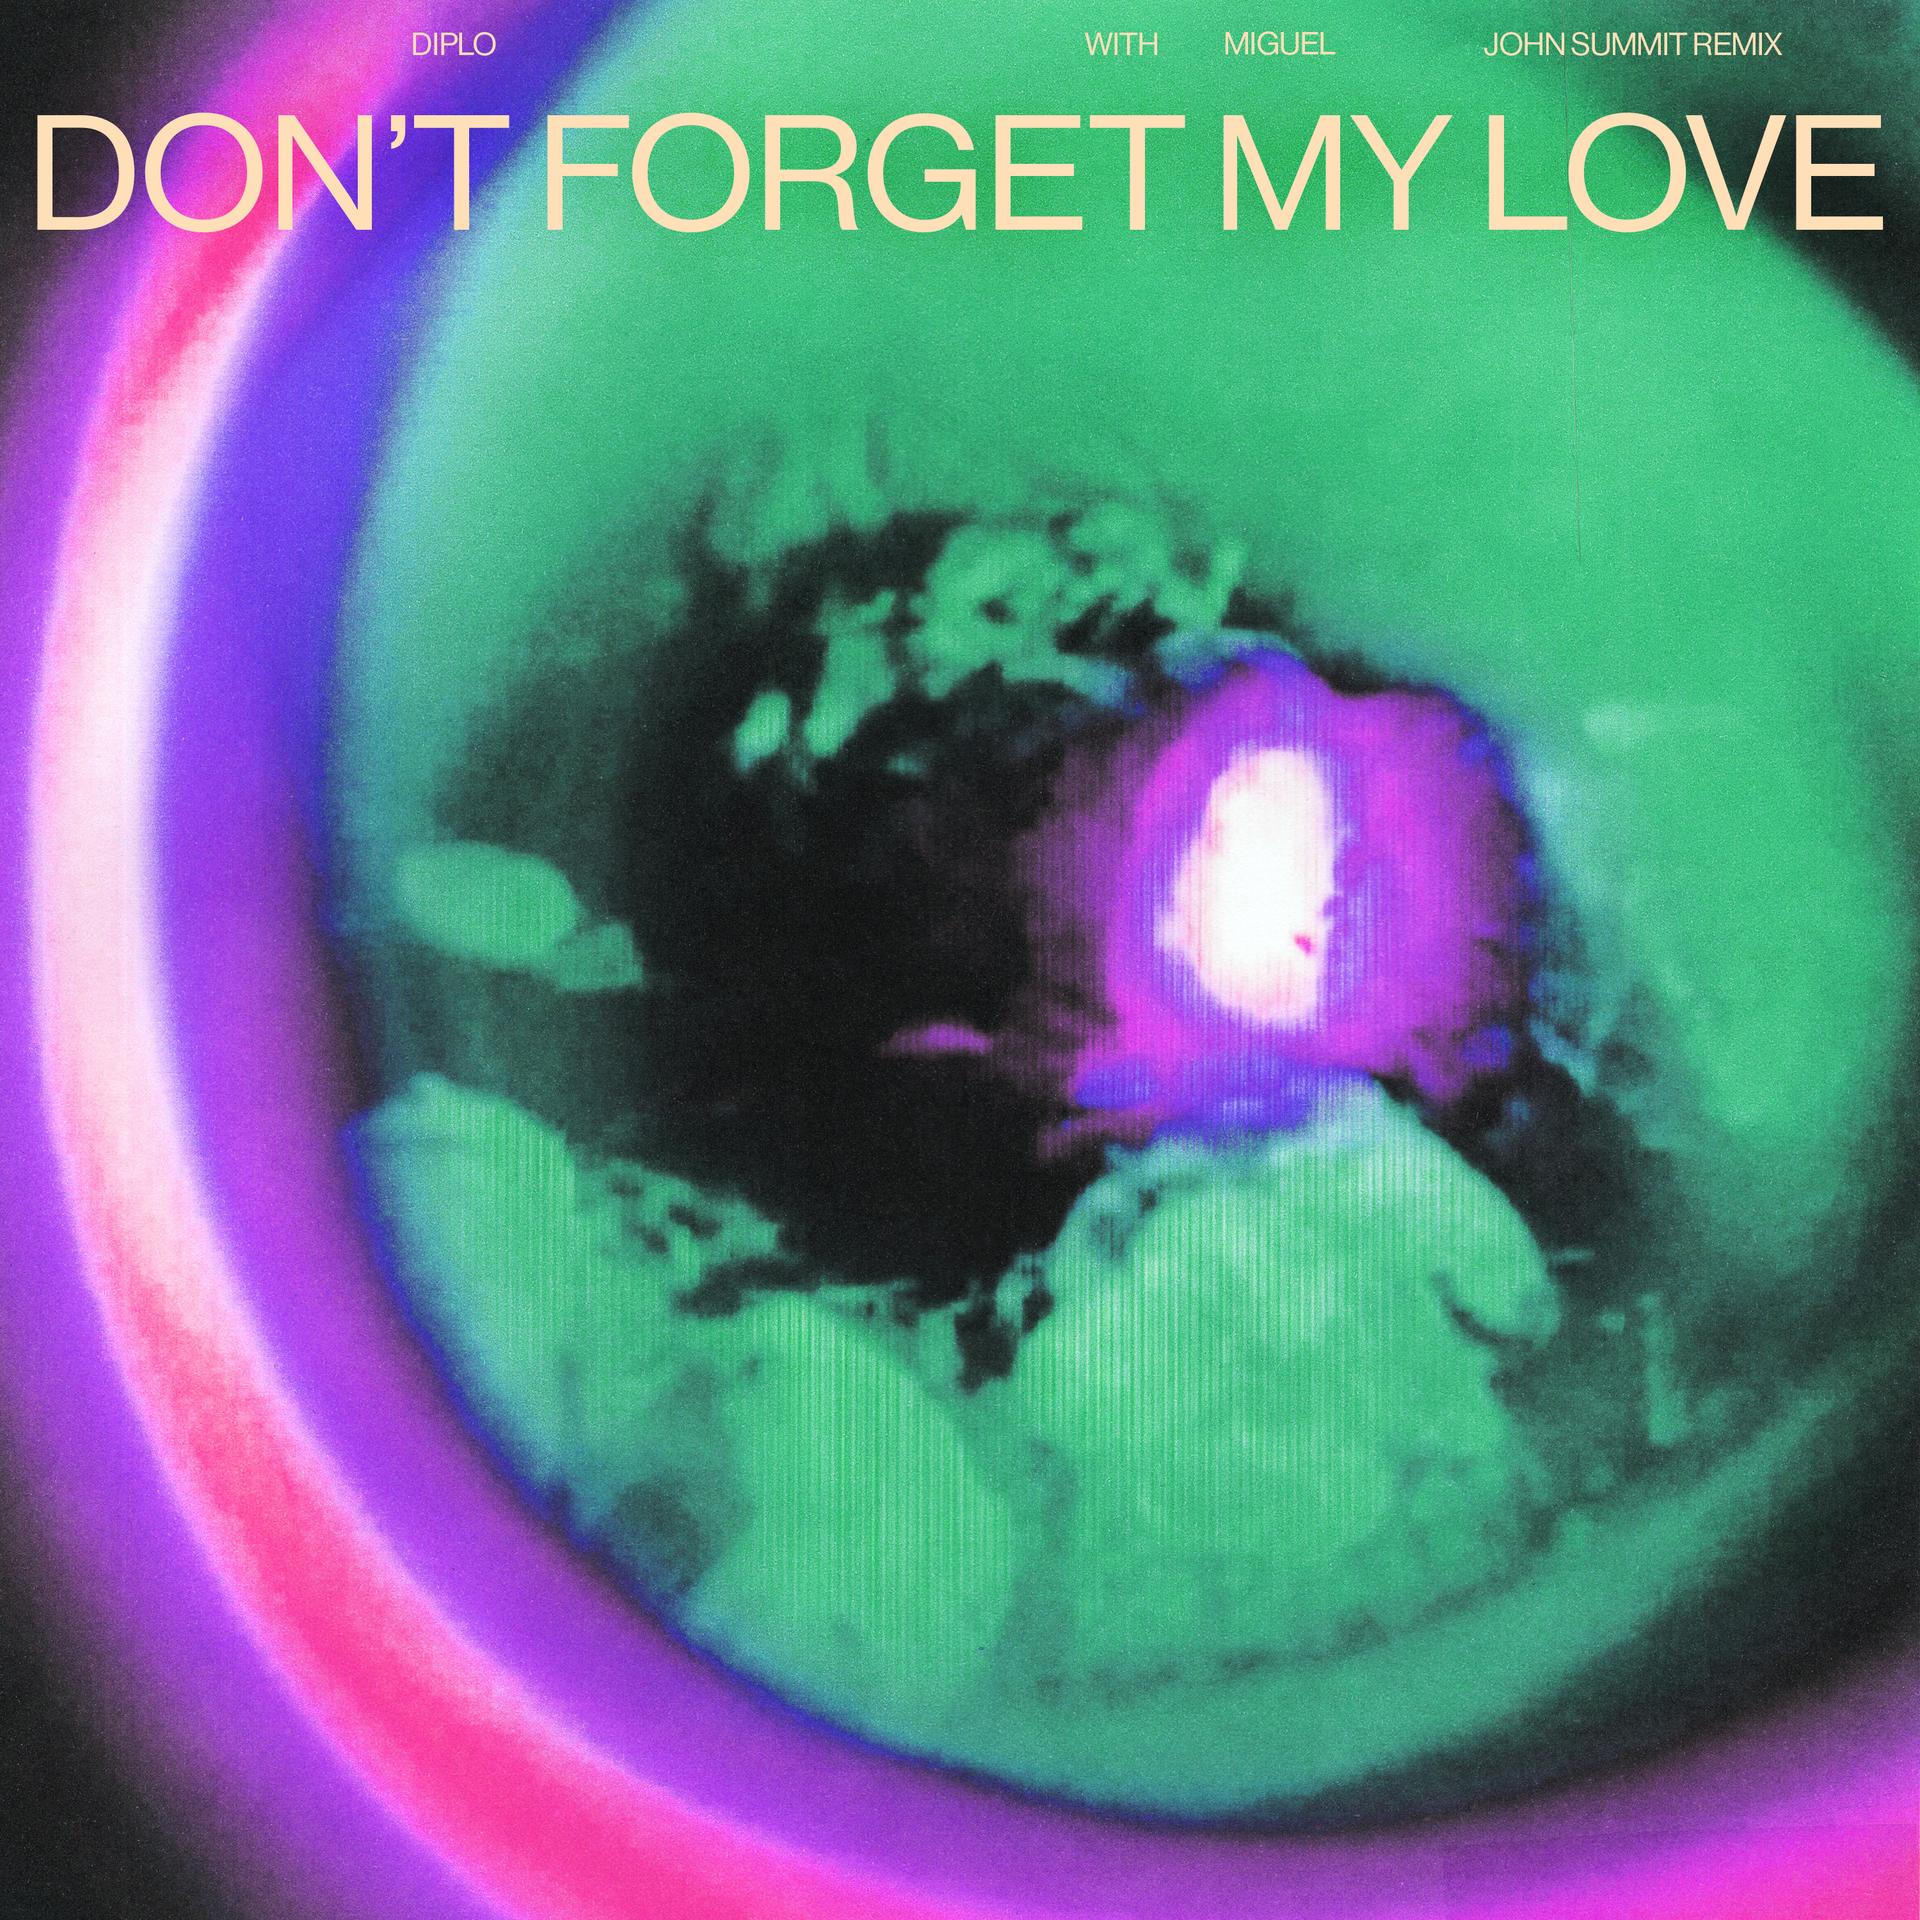 Dont Forget My Lovediplo、miguel高音质在线试听dont Forget My Love歌词歌曲下载酷狗音乐